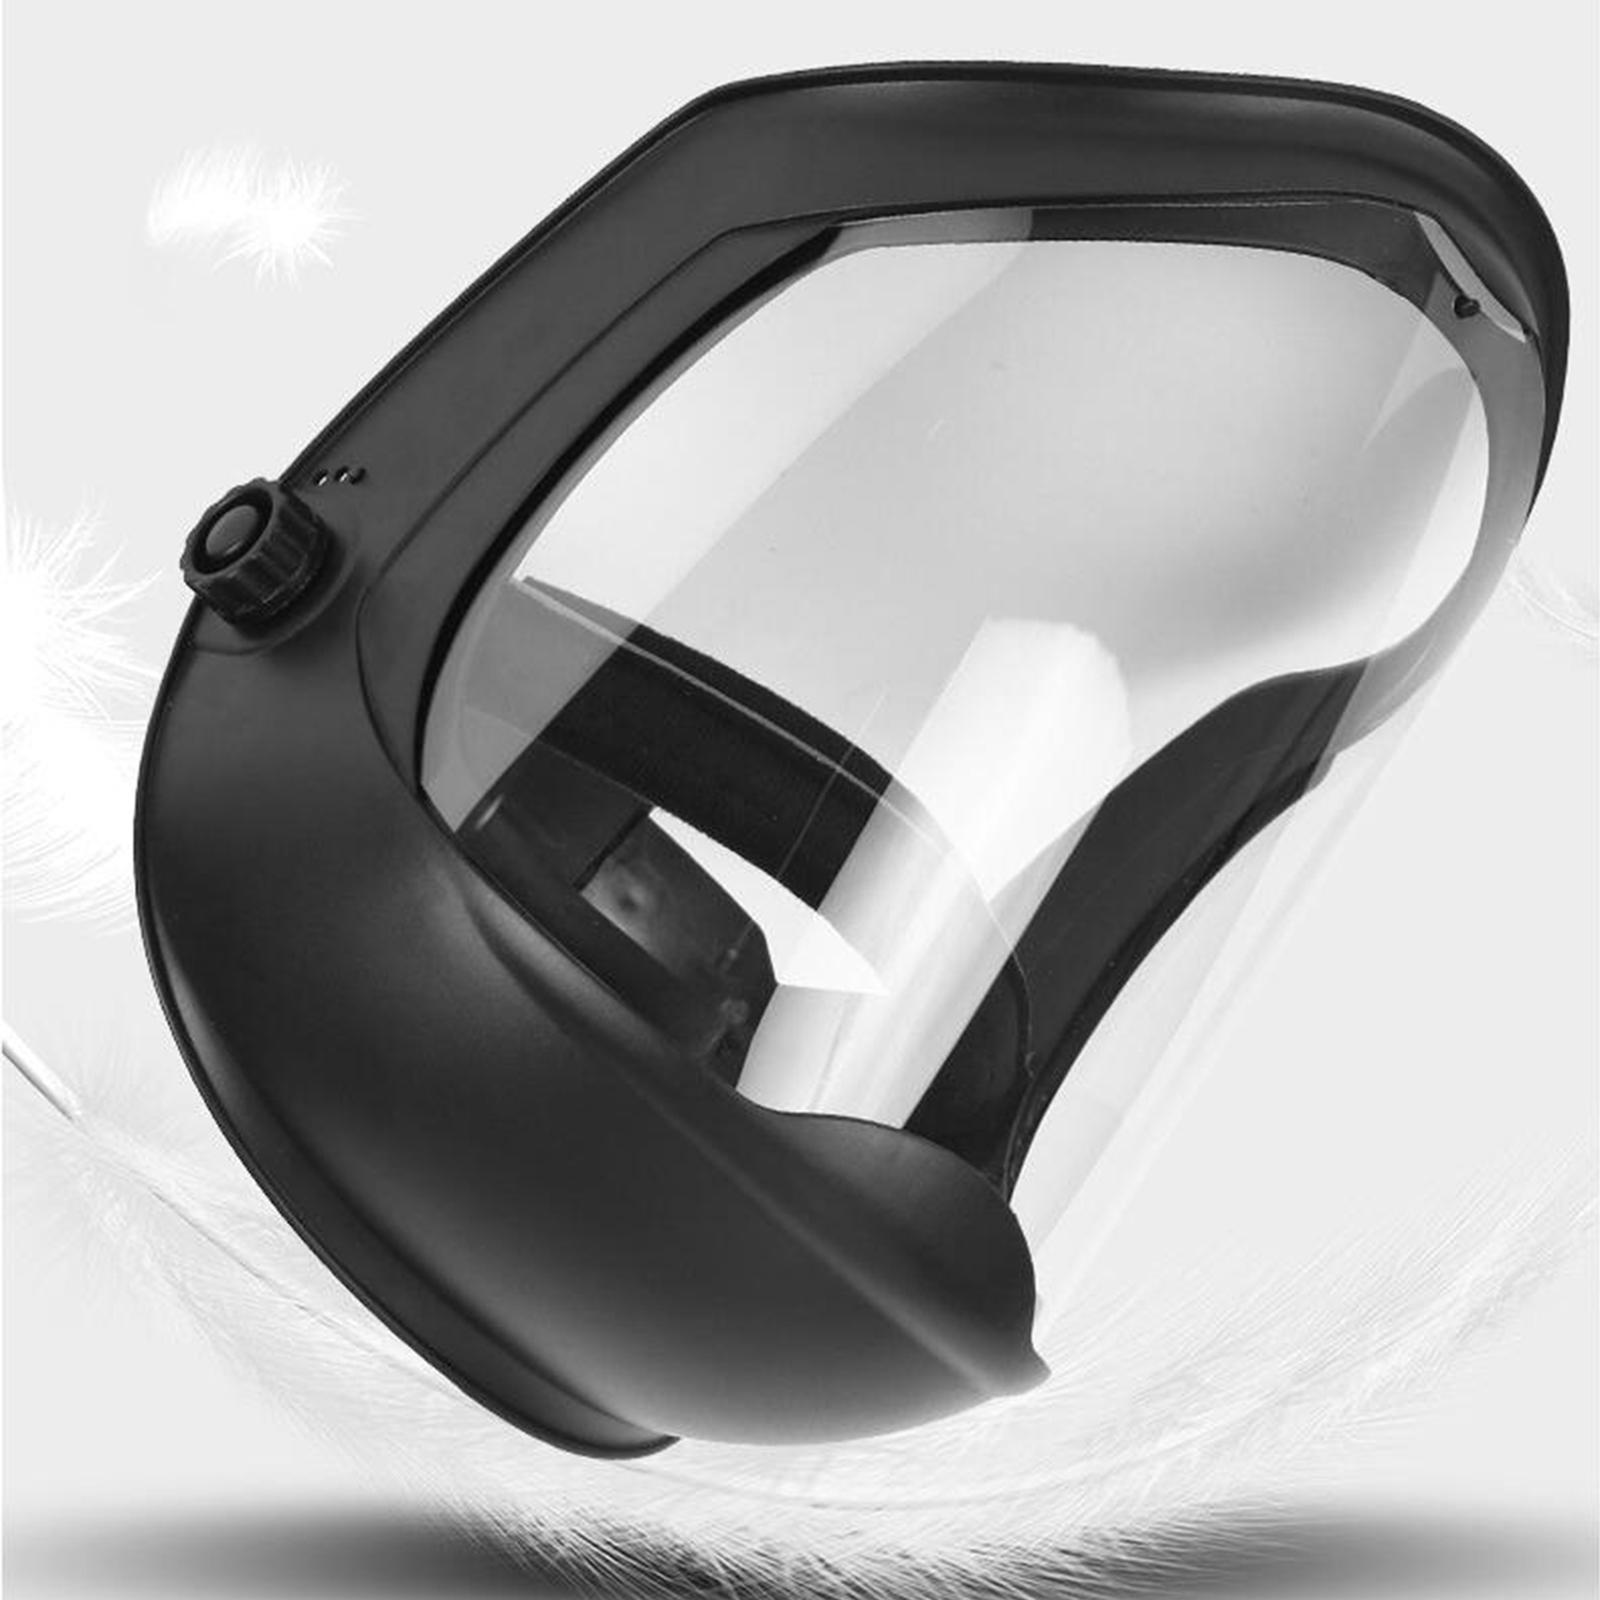 2 Pieces Face Shield Helmet Mask w/Clear Visor Safety Grinding Eye Protect